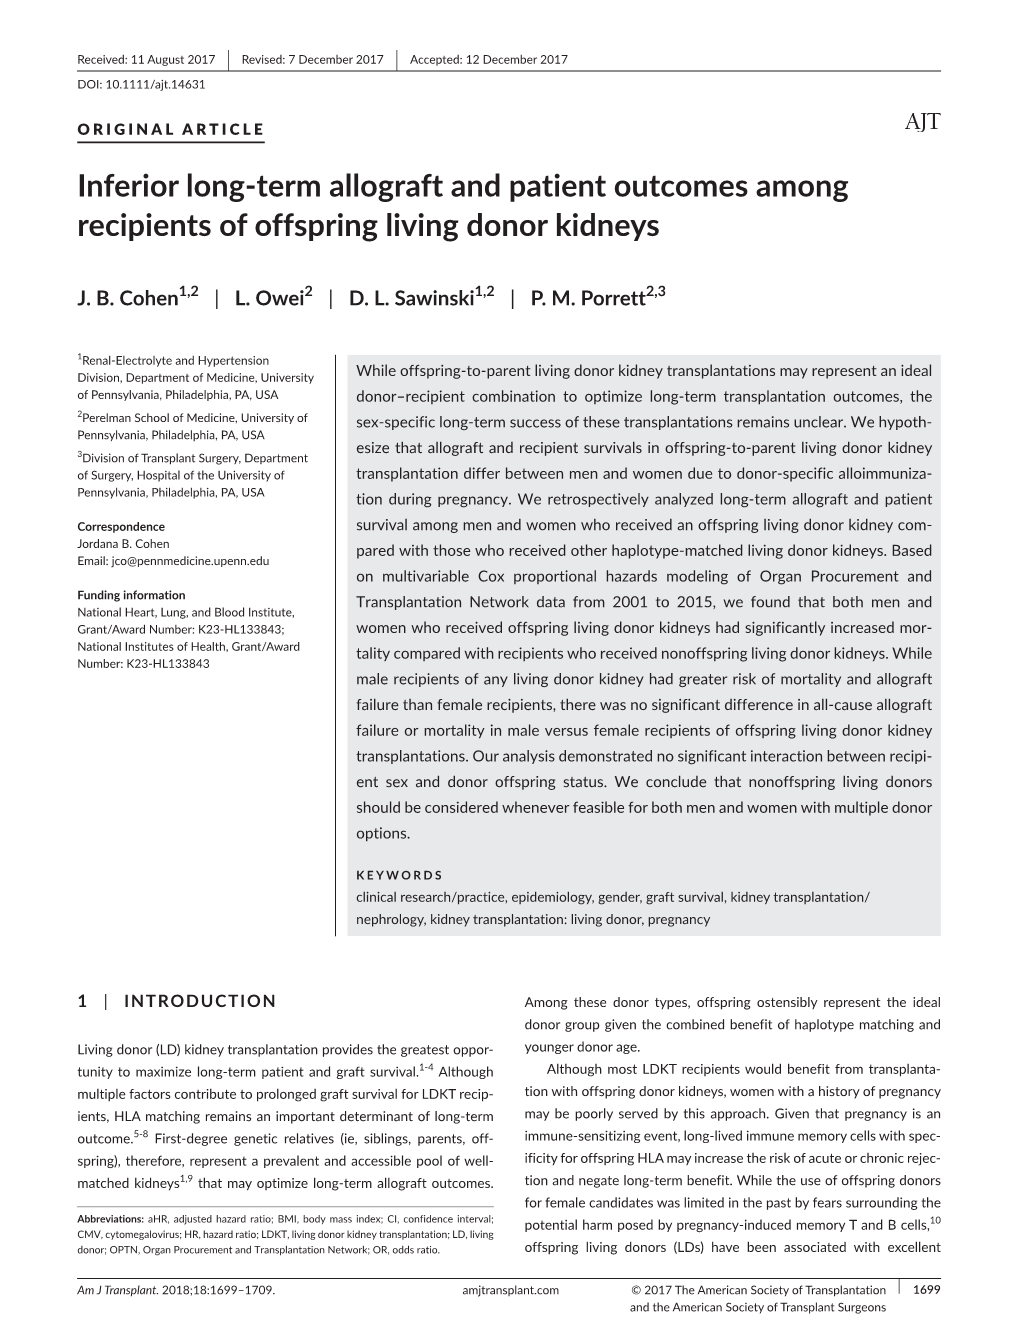 Inferior Long- Term Allograft and Patient Outcomes Among Recipients of Offspring Living Donor Kidneys